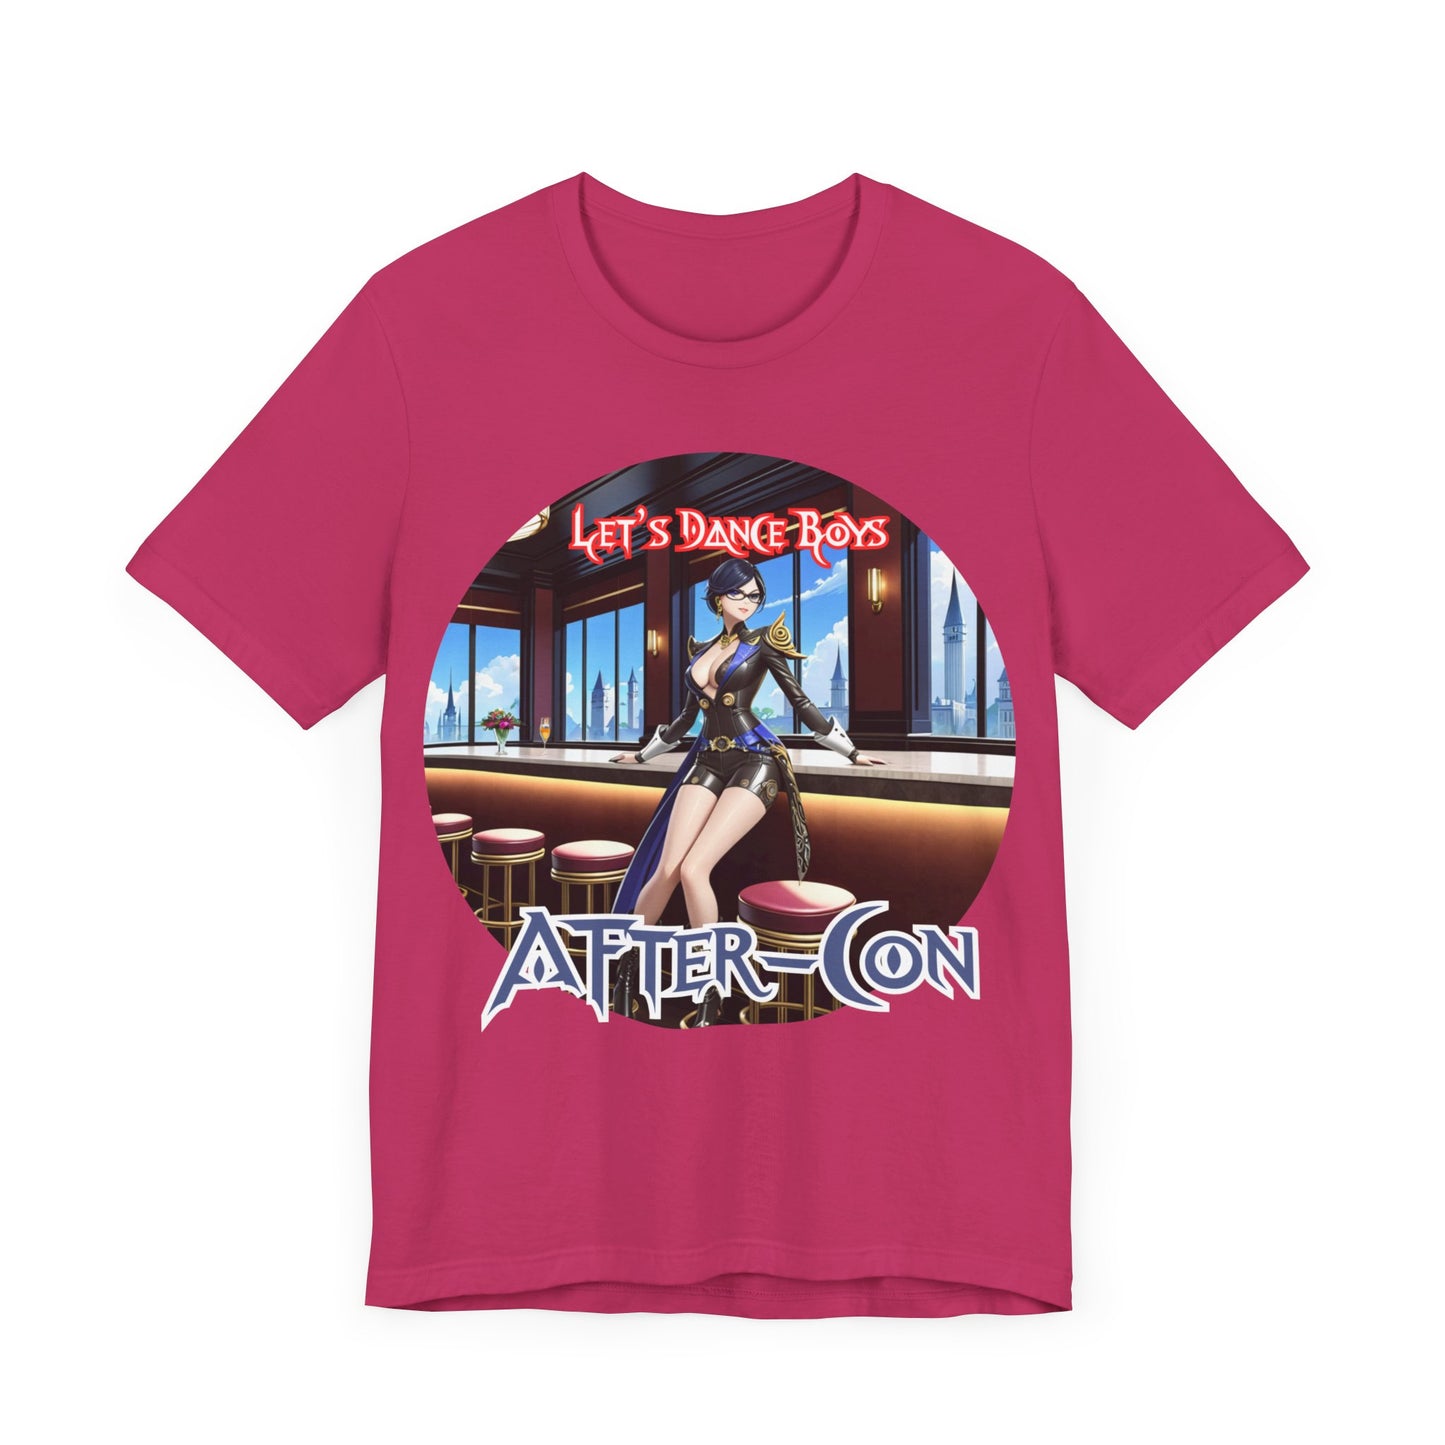 After-Con "Let's Dance Boys!" Unisex Jersey Short Sleeve Tee